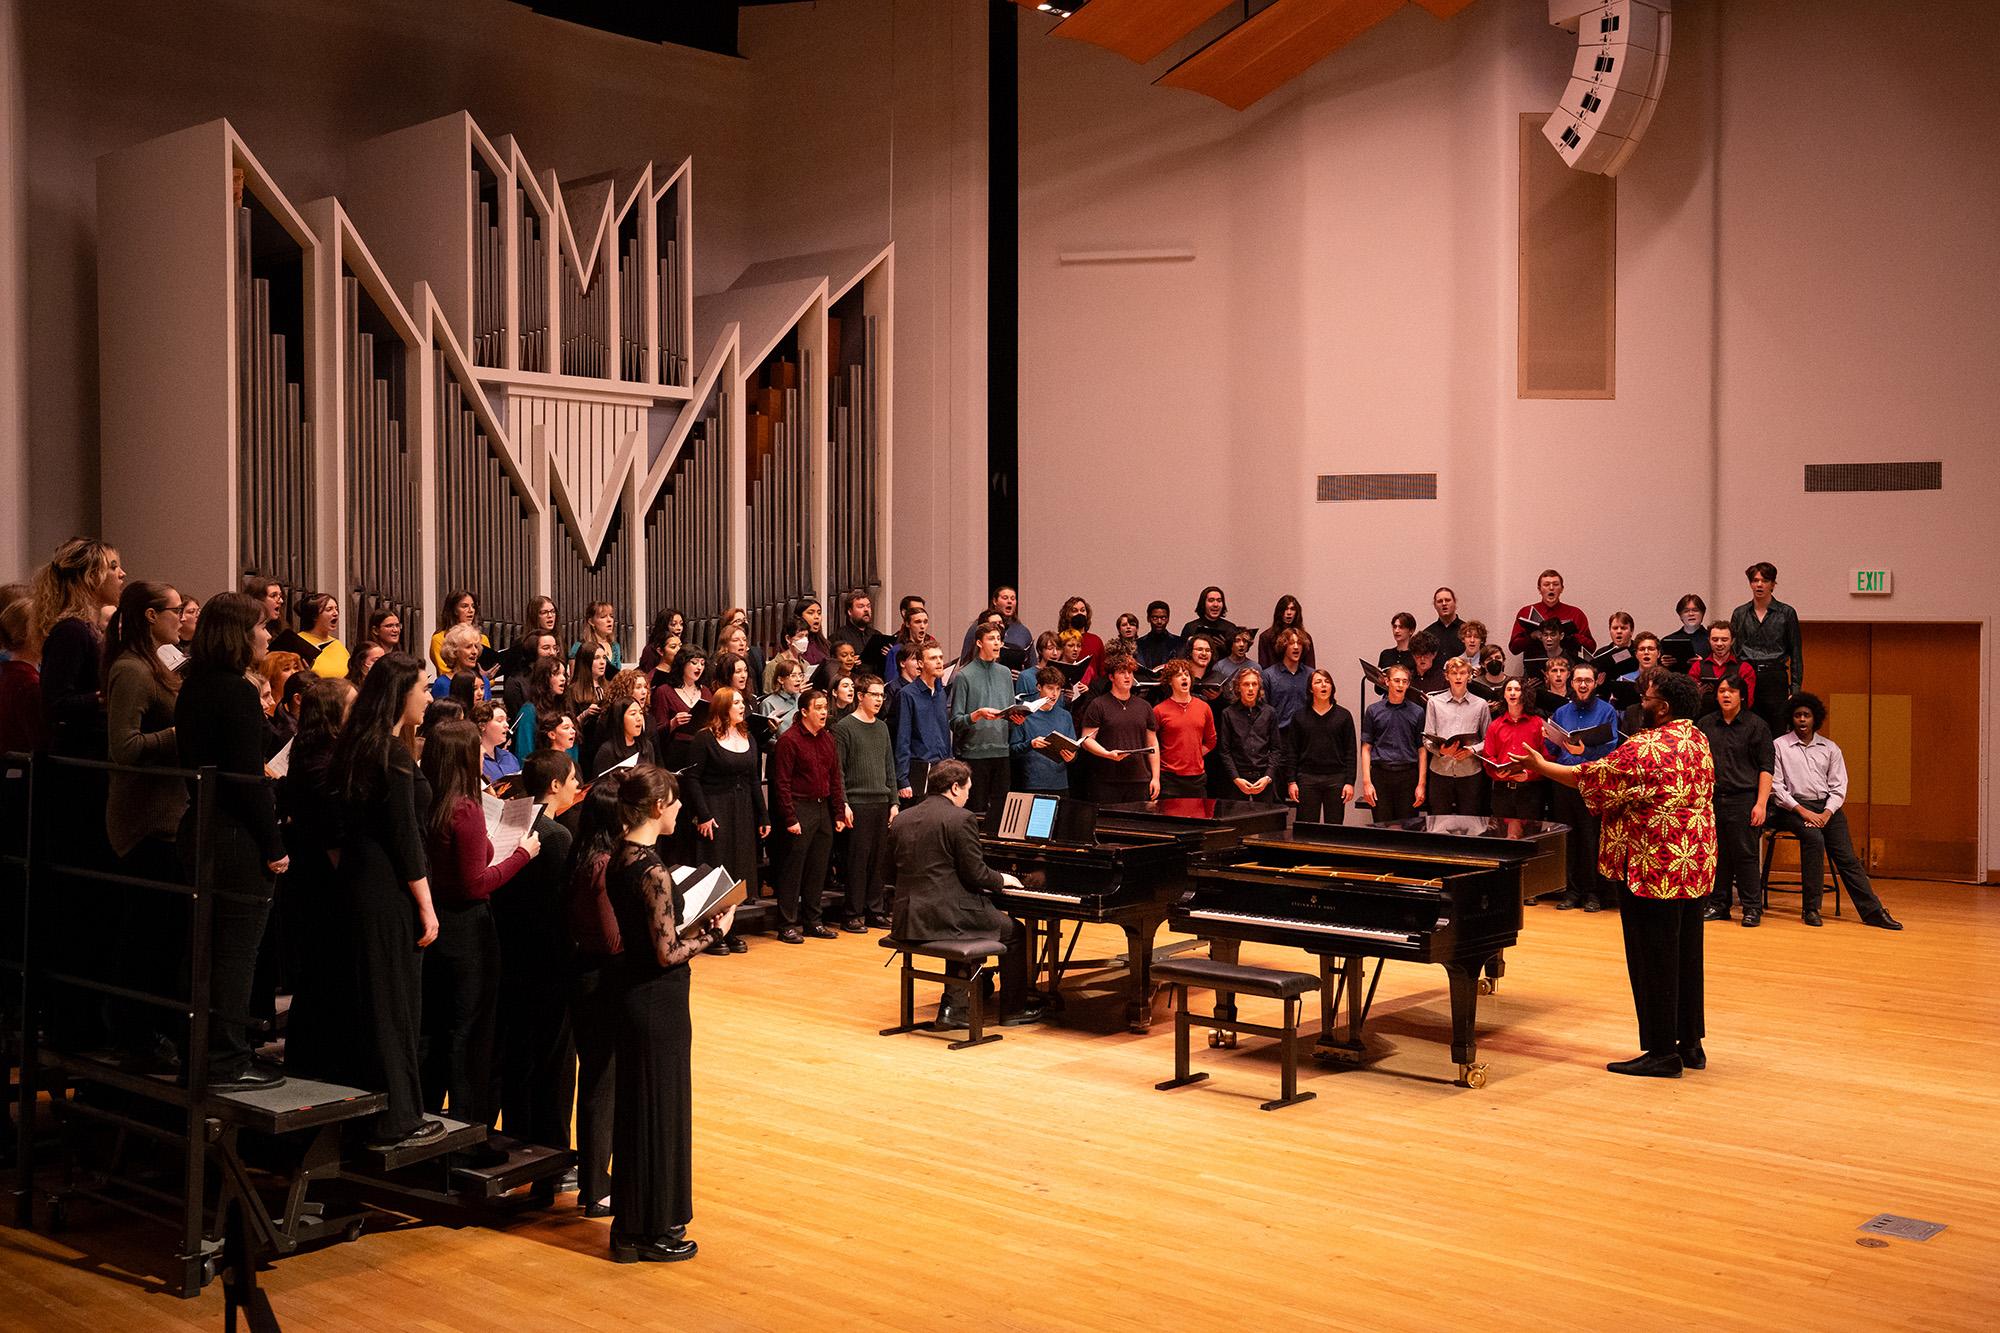 A conductor in front of two pianos - one being played - and surrounded by a singing choir in Western's concert hall